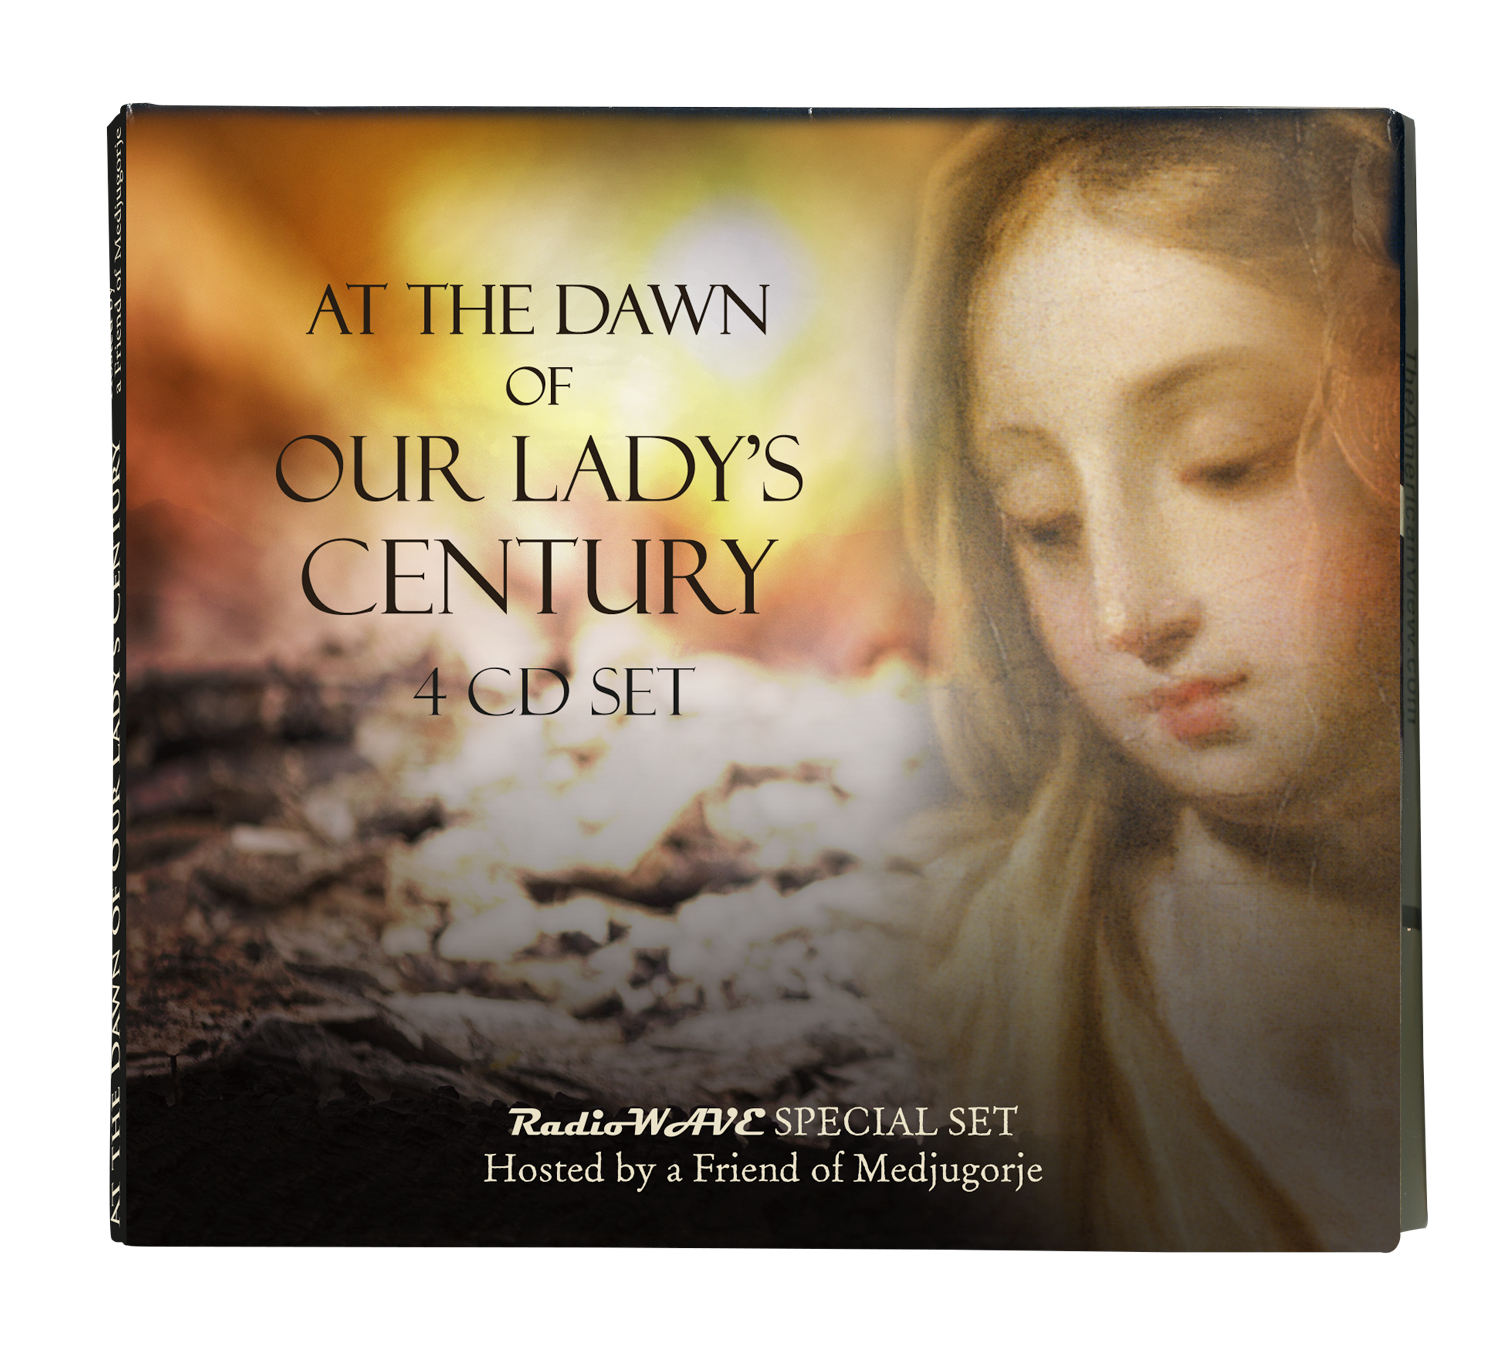 At the Dawn of Our Lady's Century 4-CD Set